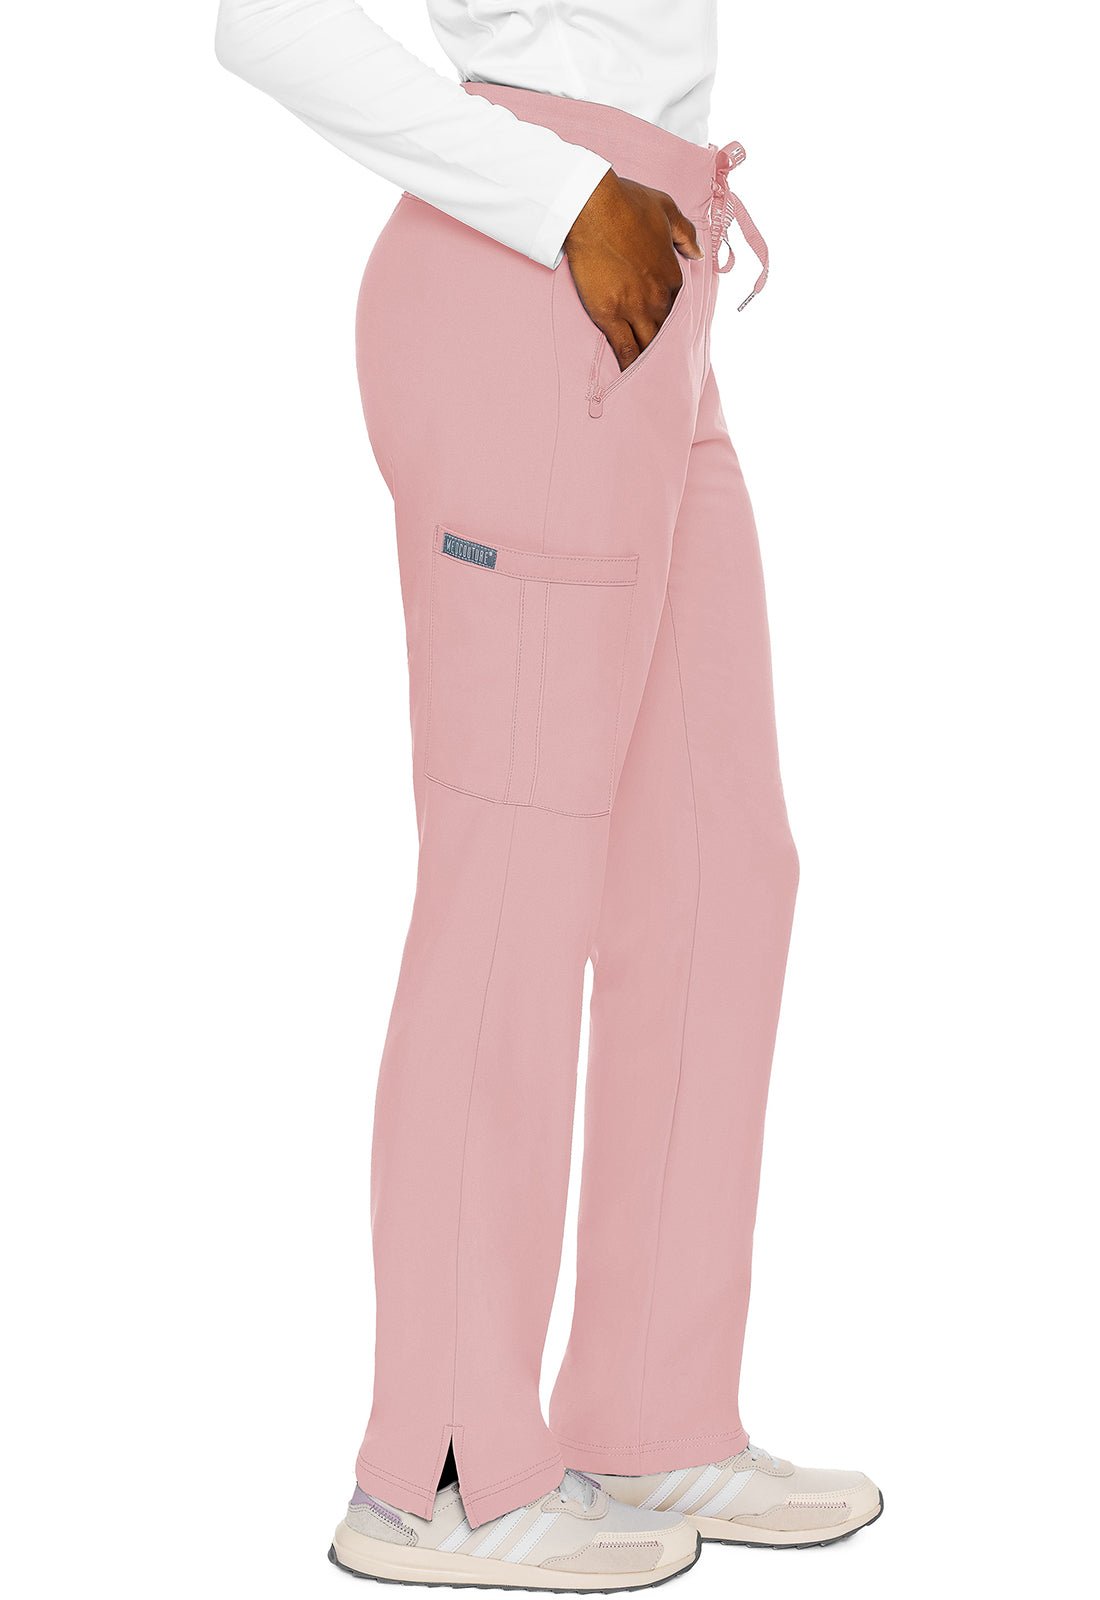 Med Couture Insight Drawstring Scrub Pant MC2702 in Coral, Grape, Lilac, Pink - Scrubs Select